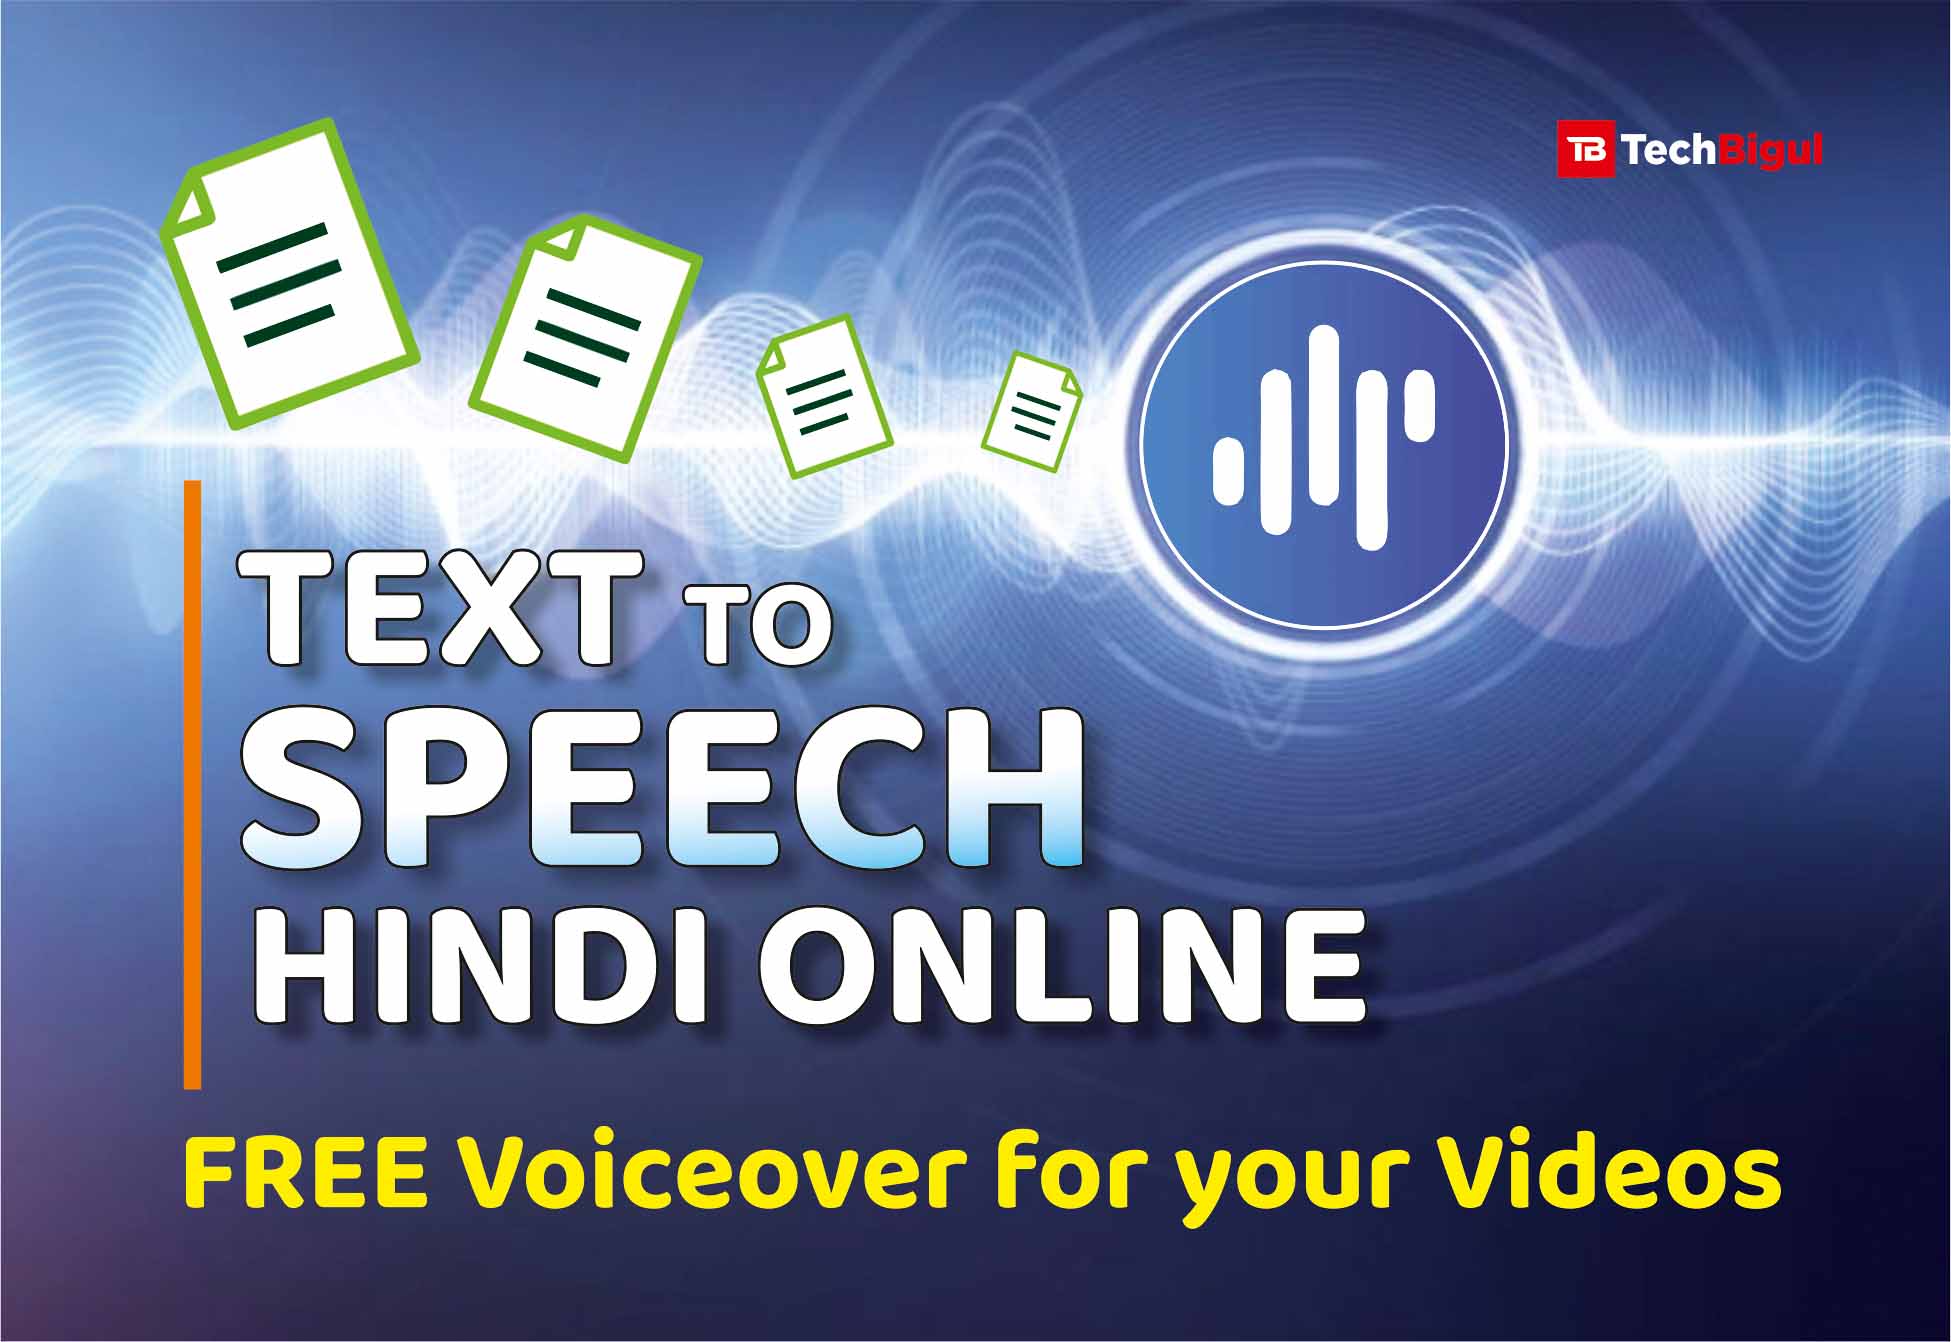 BEST text to speech hindi online cover